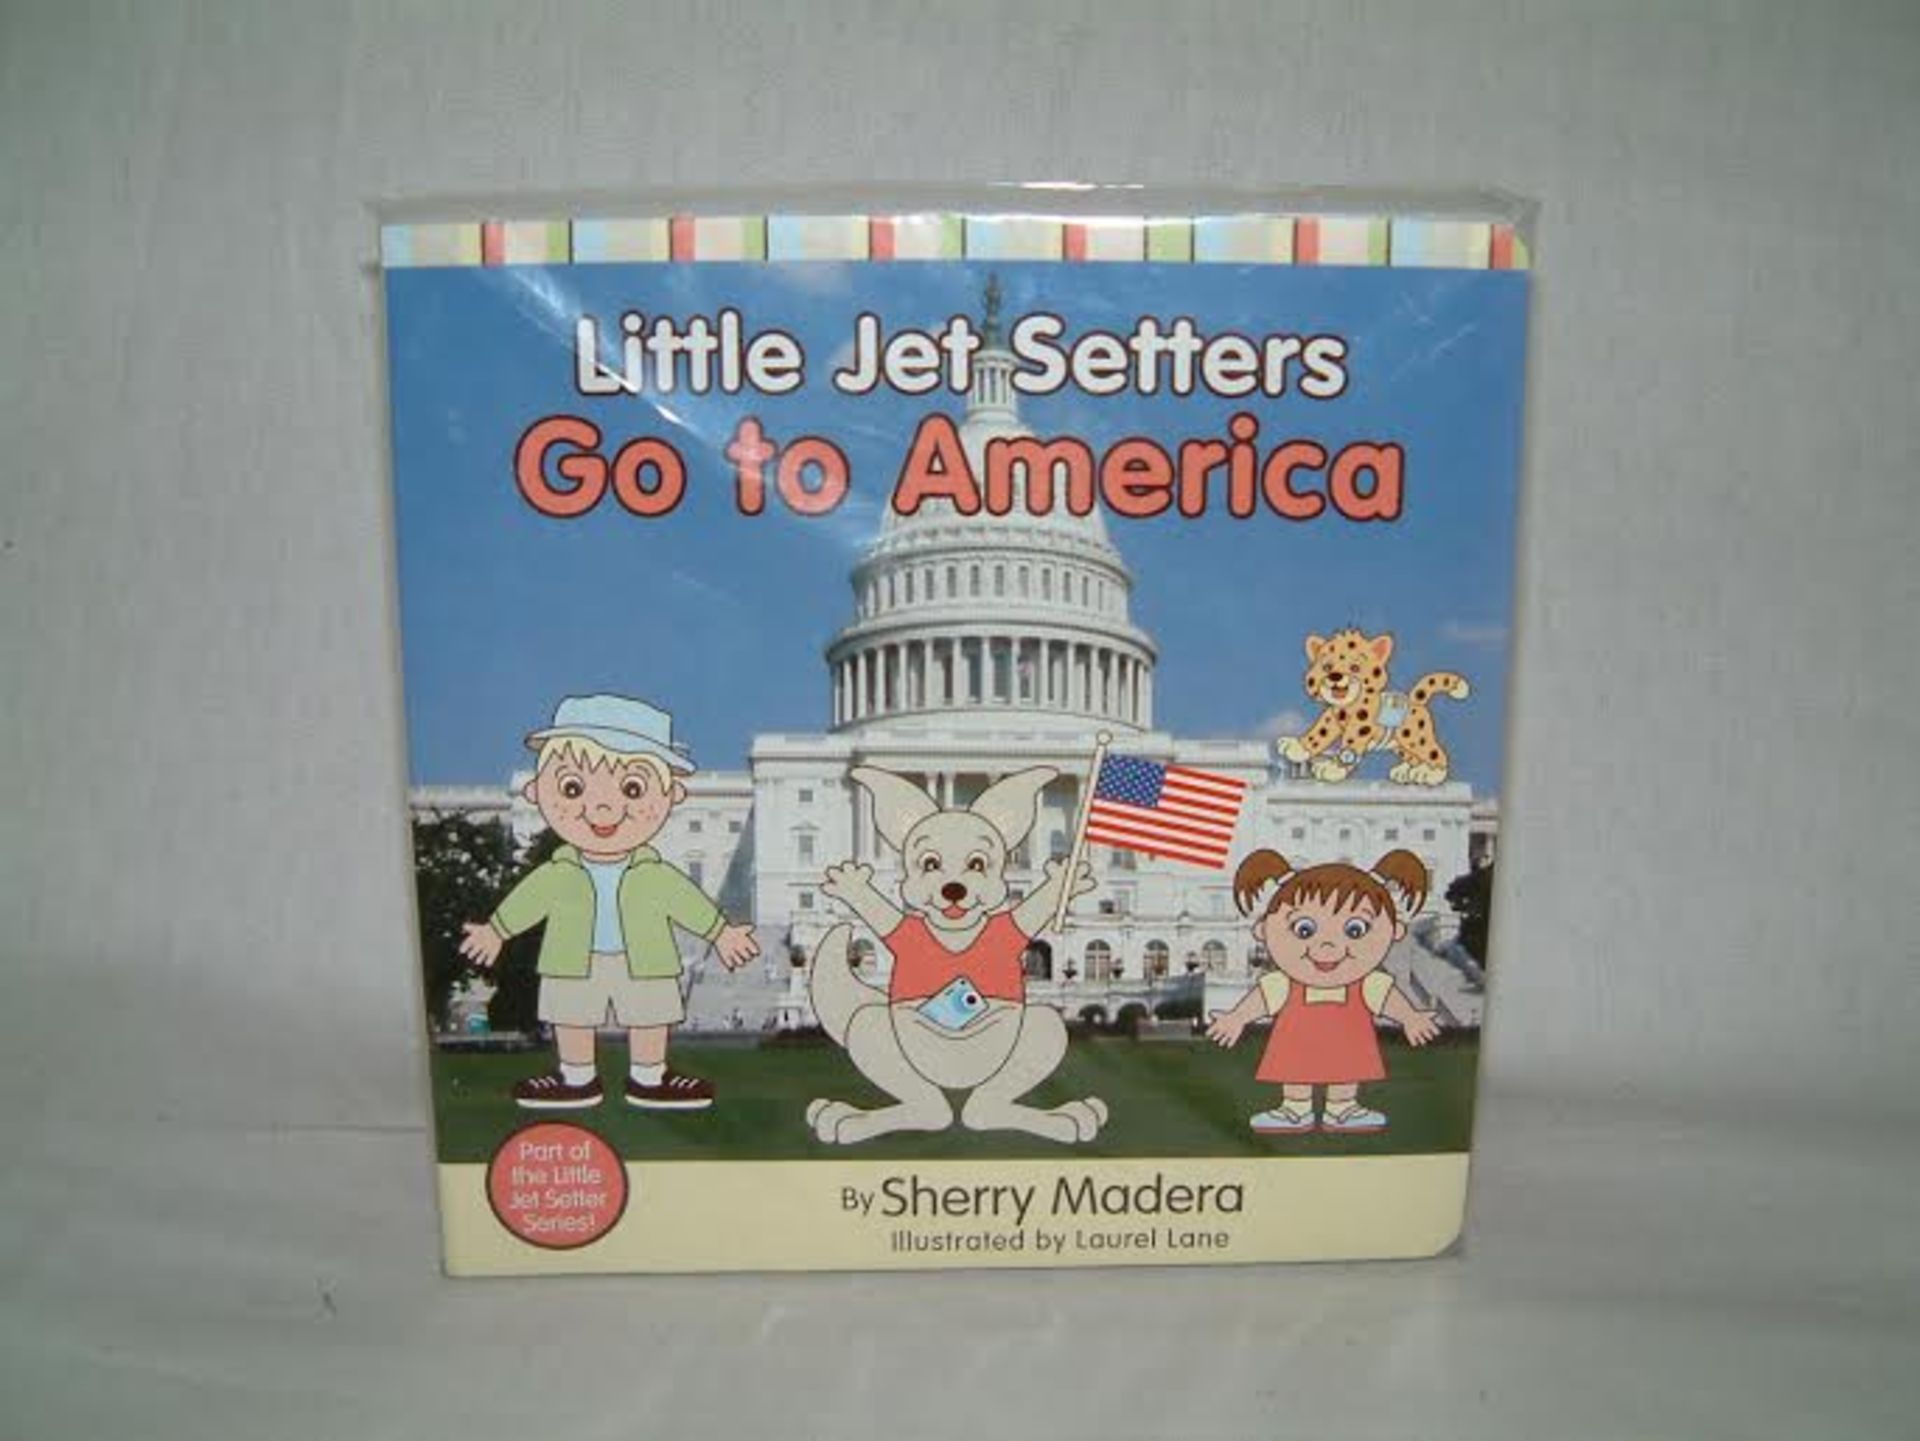 100x Little Jet Setters "Go to America" Book. RRP £4.99.